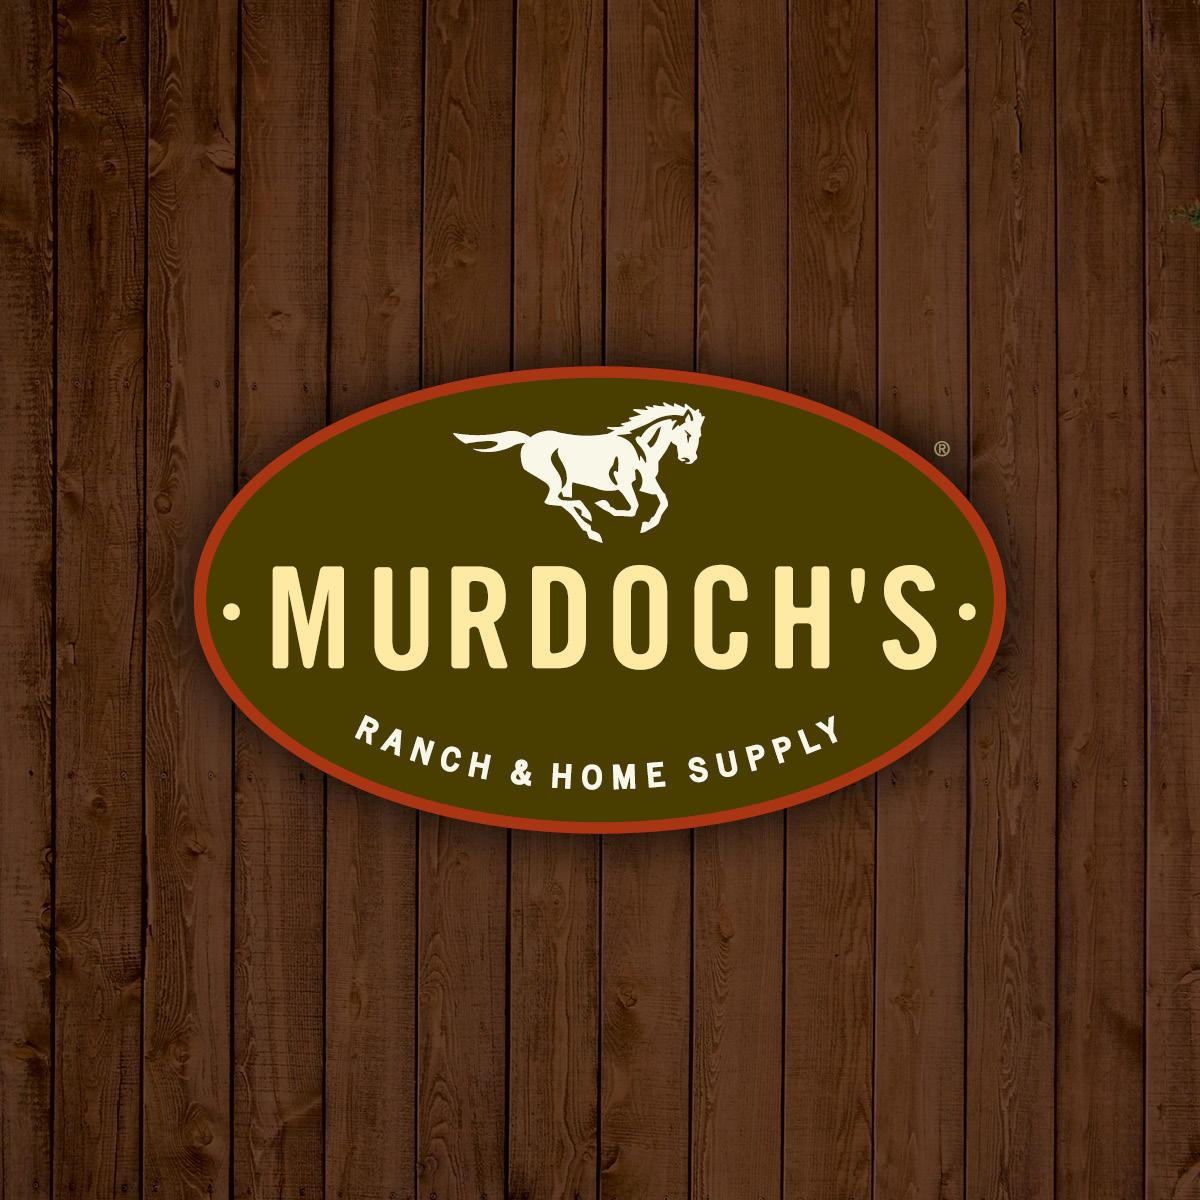 Murdoch's Ranch & Home Supply - Silverthorne, CO 80498 - (970)513-6551 | ShowMeLocal.com